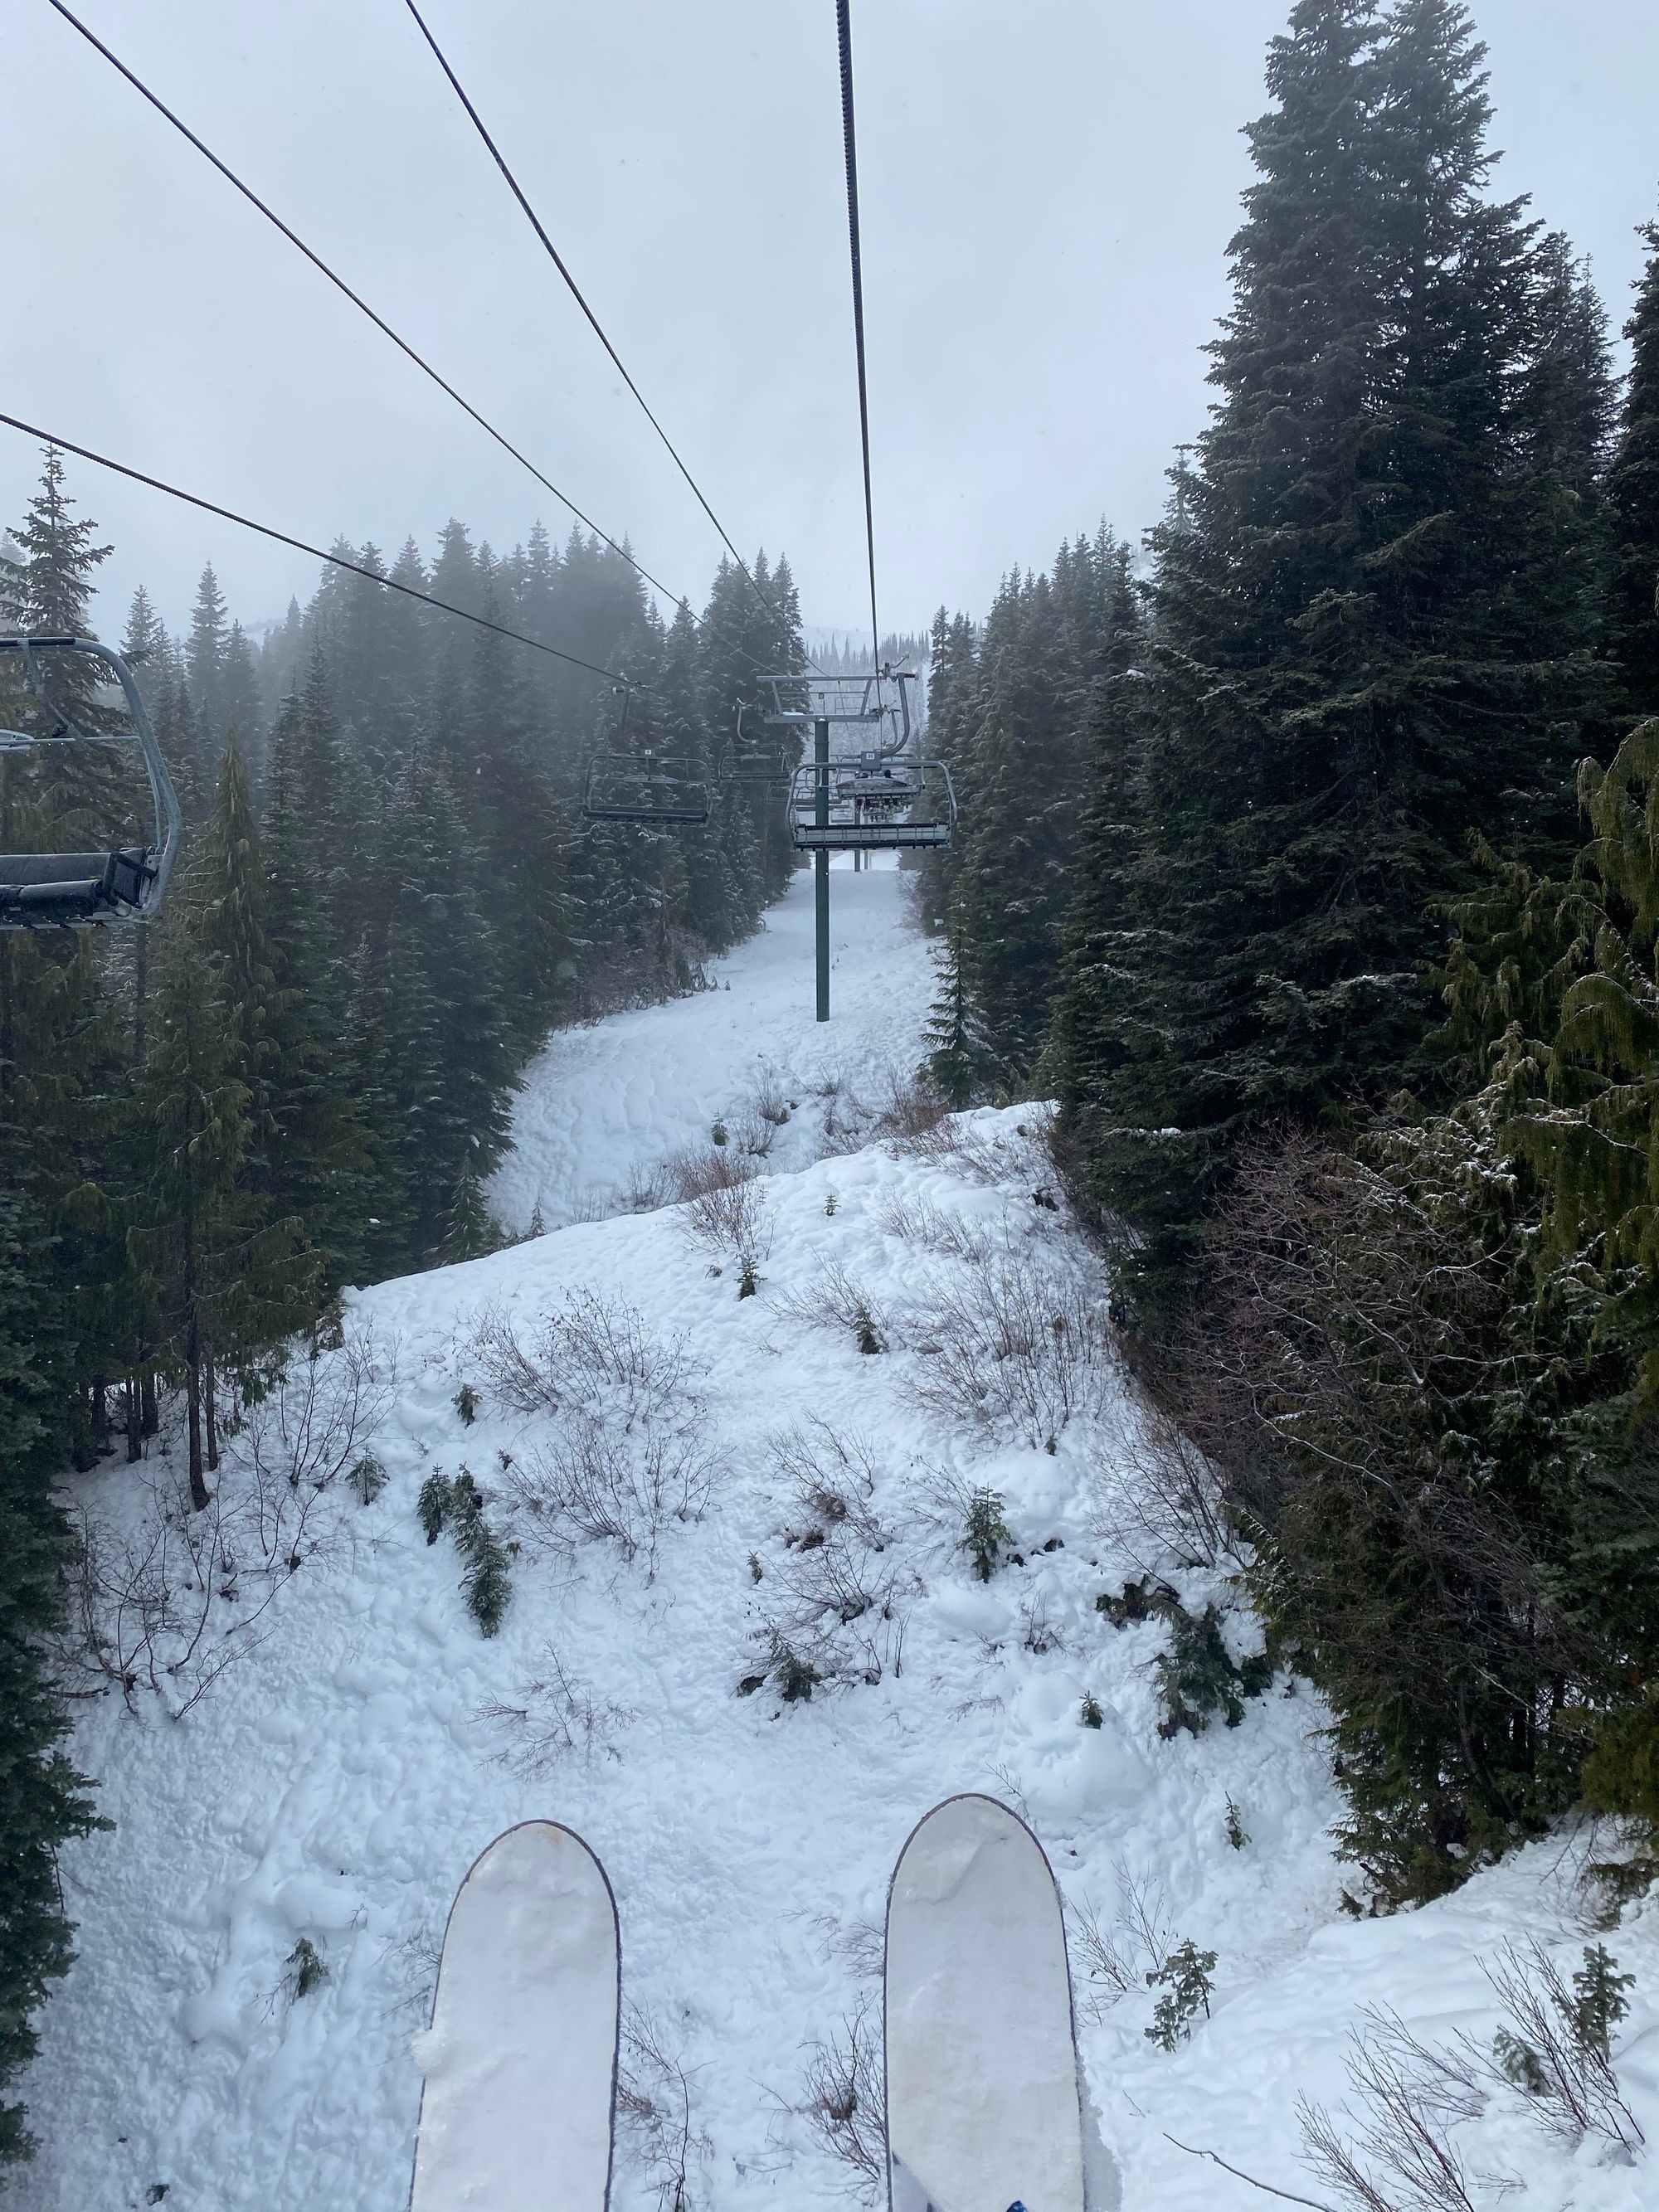 Trip Report: Crystal Mountain